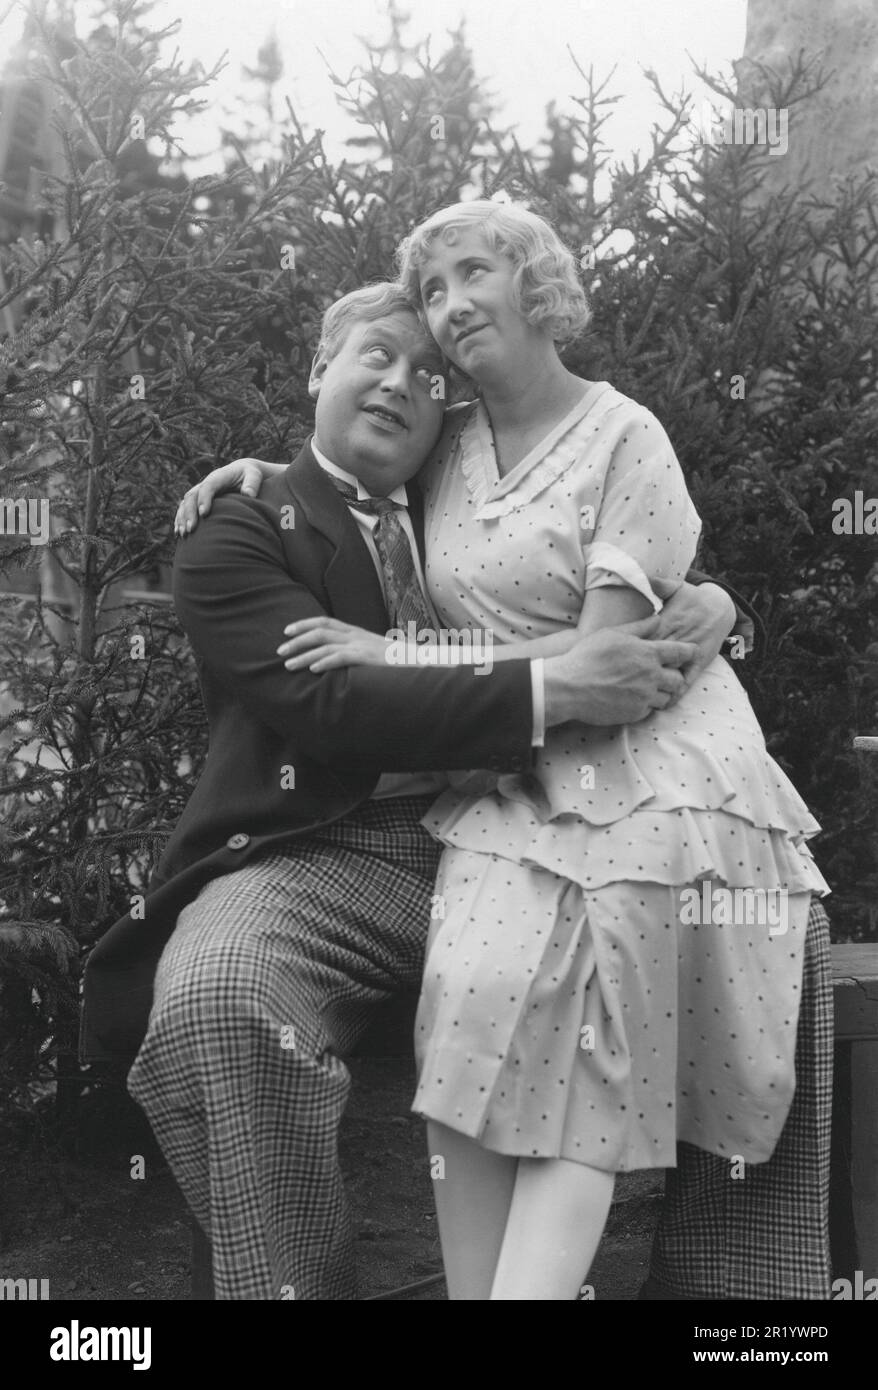 Love in the 1930s. A couple and where she sits on his lap and they are hugging each other tenderly. They are actors Thor Modéen and Rut Holm during the filming of 'Augustas lilla felsteg' 1933. Stock Photo